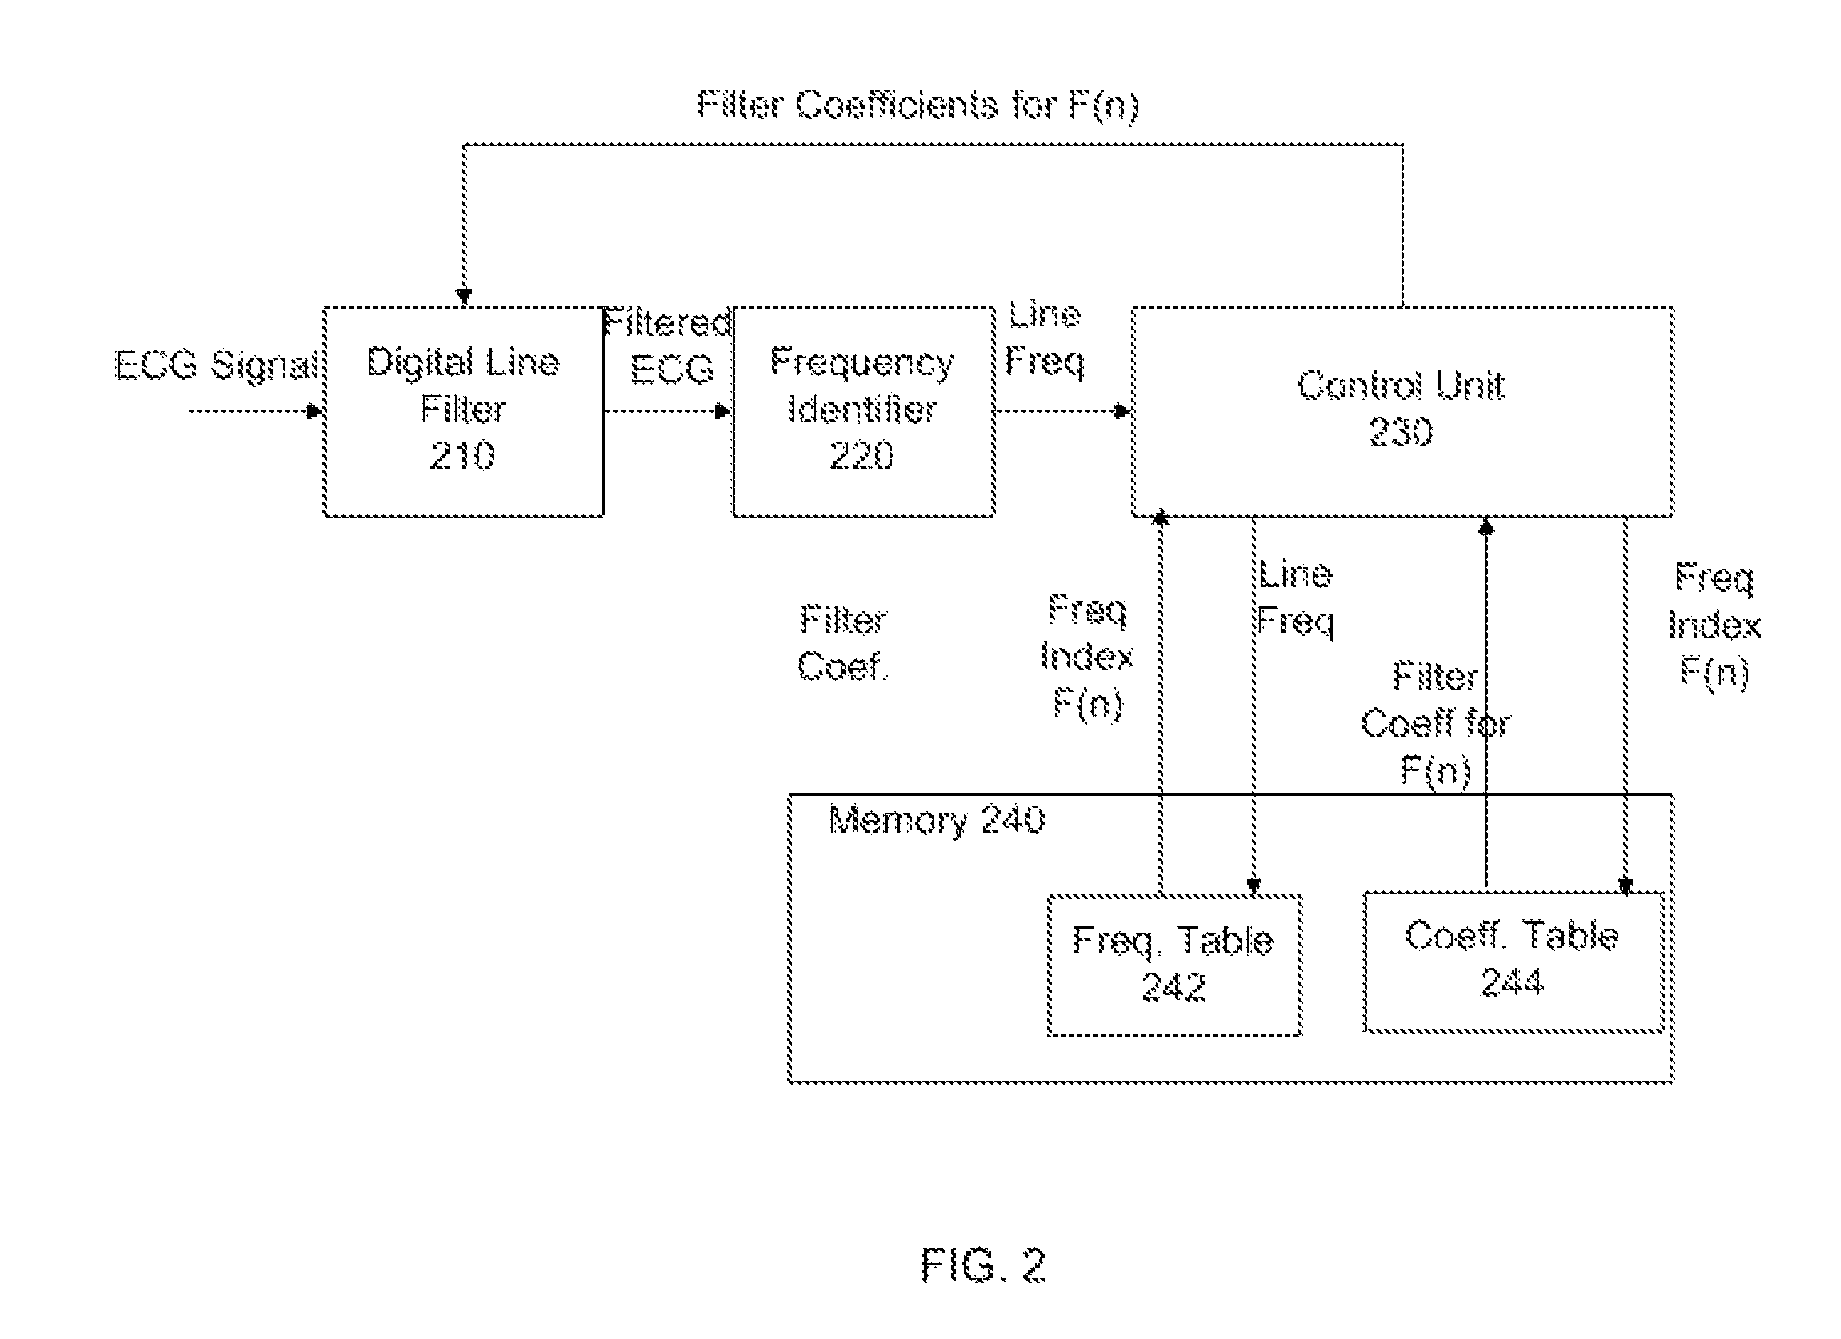 Method and system for reducing power line interferences in an ECG signal